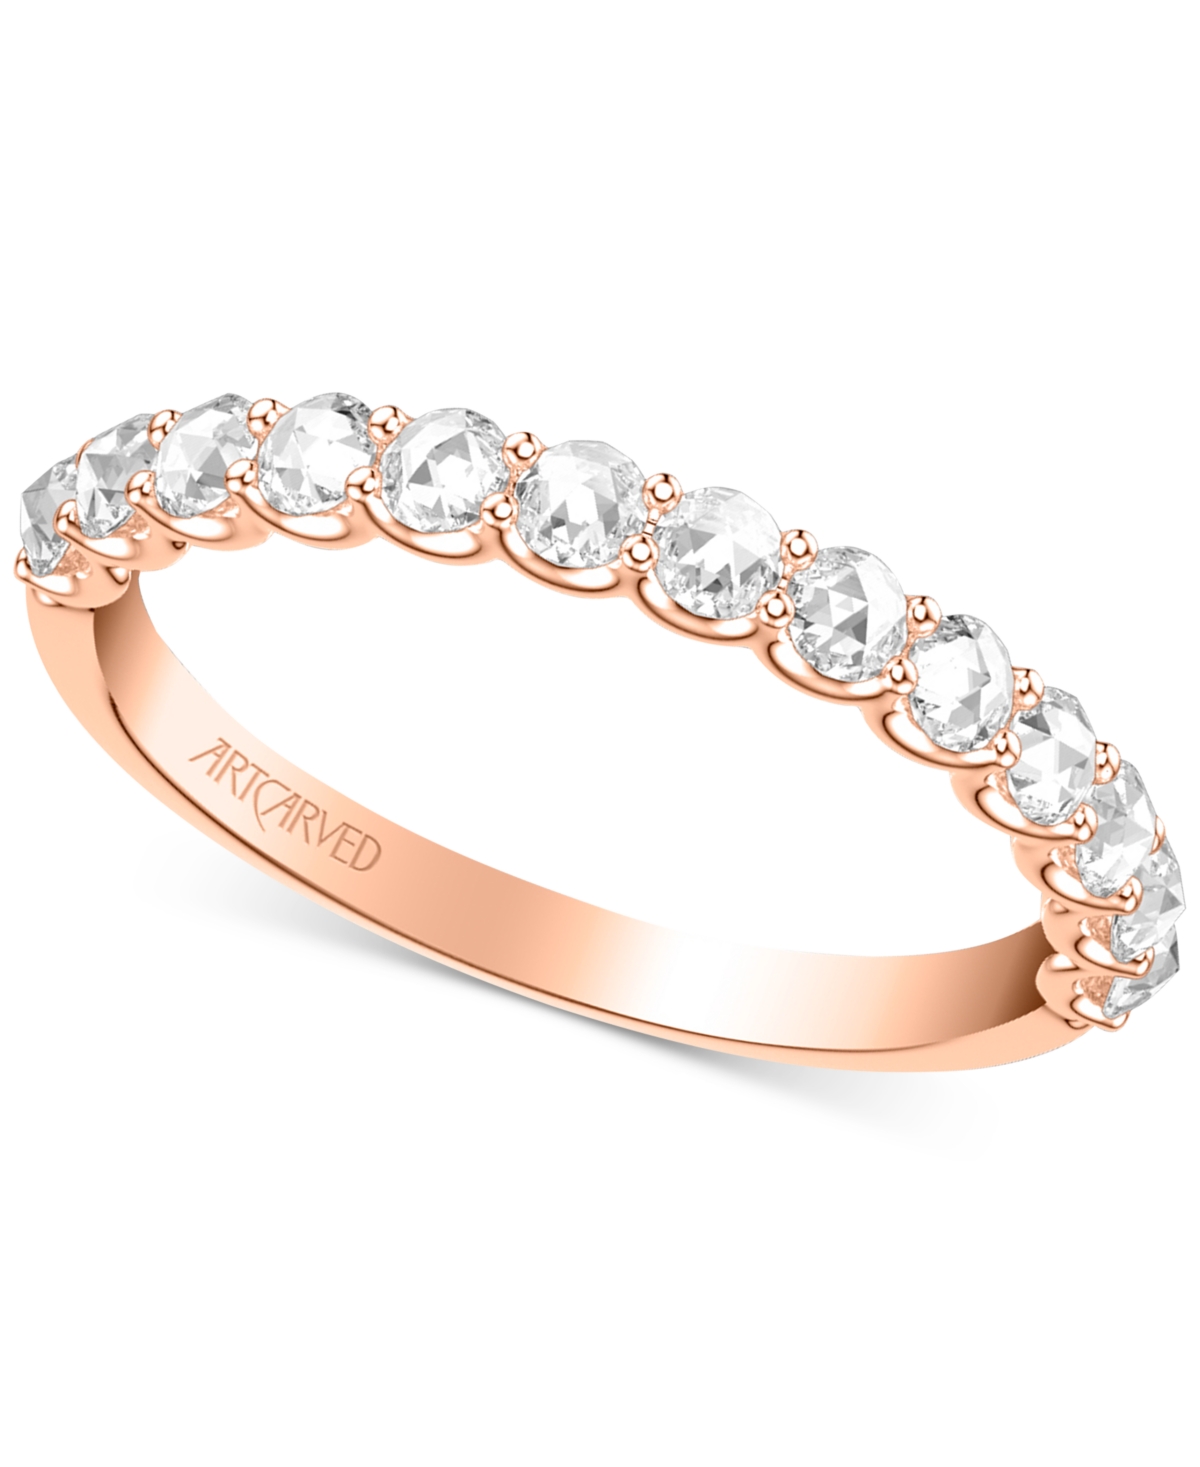 Artcarved Art Carved Diamond Rose-Cut Band (1/2 ct. t.w.) in 14k White, Yellow or Rose Gold